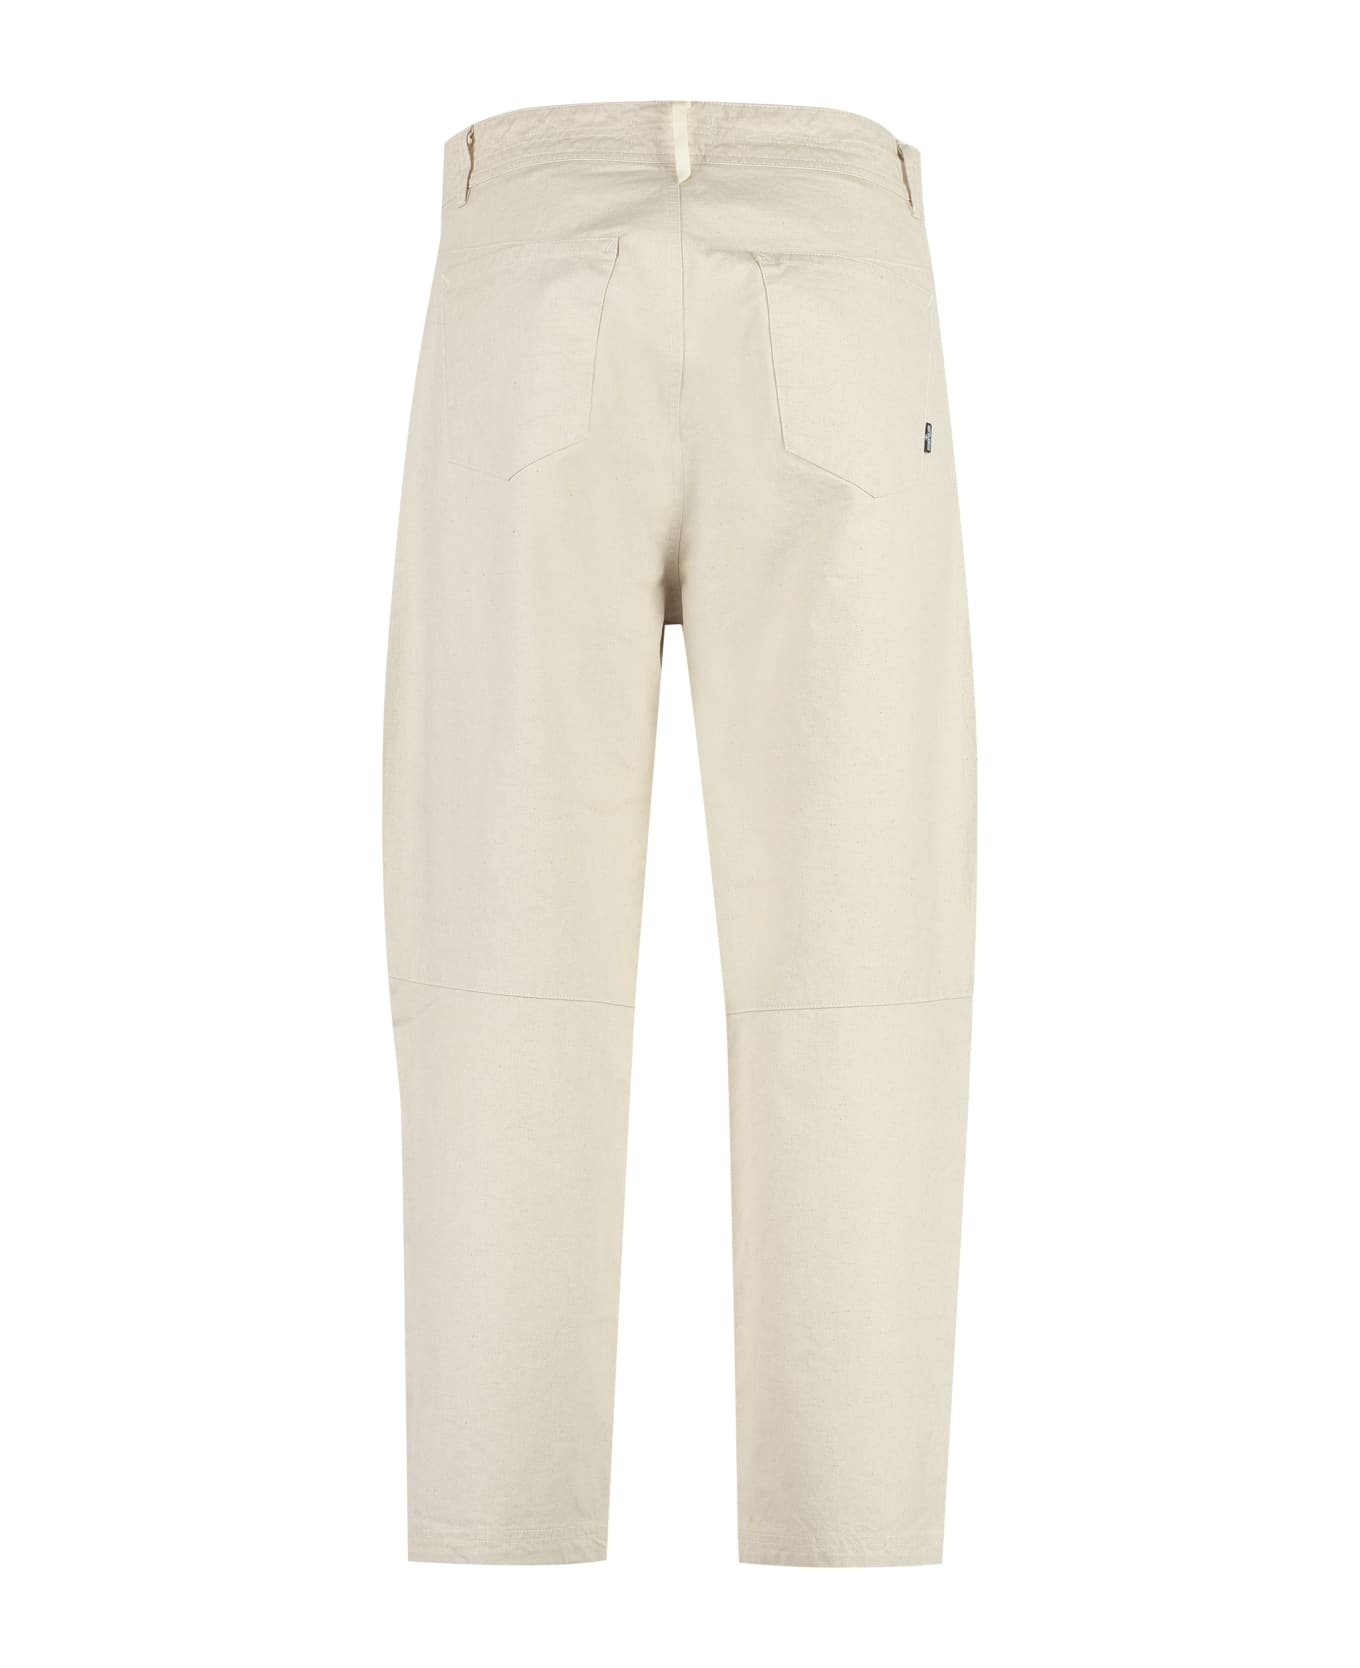 Stone Island Shadow Project Cotton Blend Slit Trousers - Sand